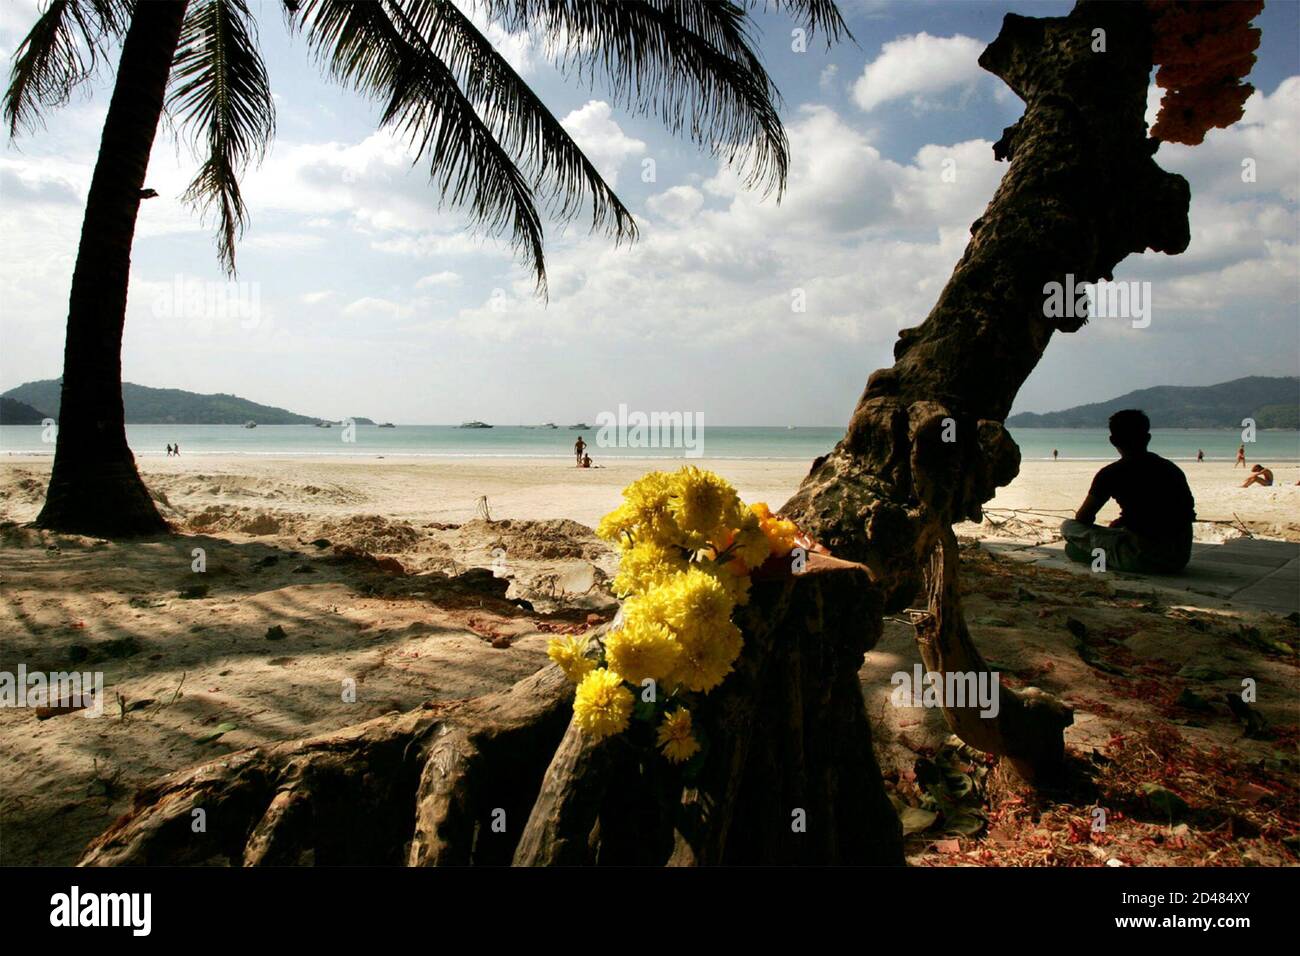 Flower are placed under a tree in Patong beach in Phuket, Thailand for victims of the tsunami January 8, 2005. The death toll in Thailand sprawled to over 5,000 after massive tidal waves, caused by a magnitude 9.0 quake off the northern Indonesian coast on December 26, devastated the southern tourist isles and beaches. Stock Photo